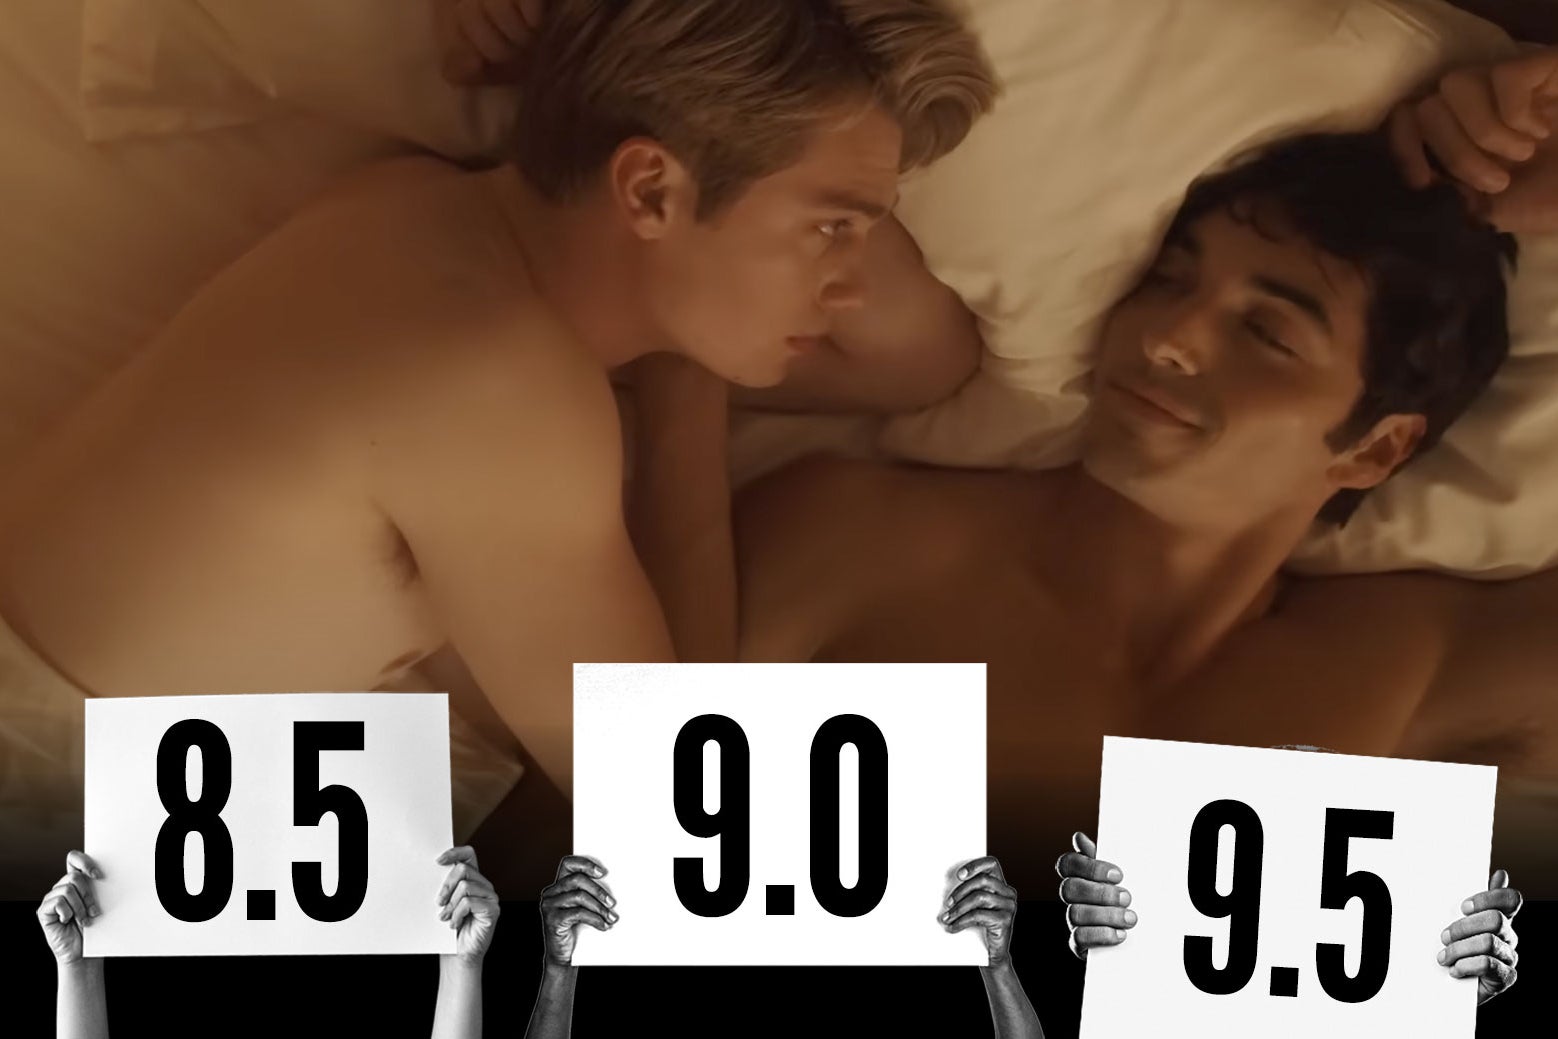 The film's protagonists—Alex Claremont-Diaz and Prince Henry—lay in bed topless looking meaningfully at each other while an illustration shows hands holding up scoring cards at the bottom. 